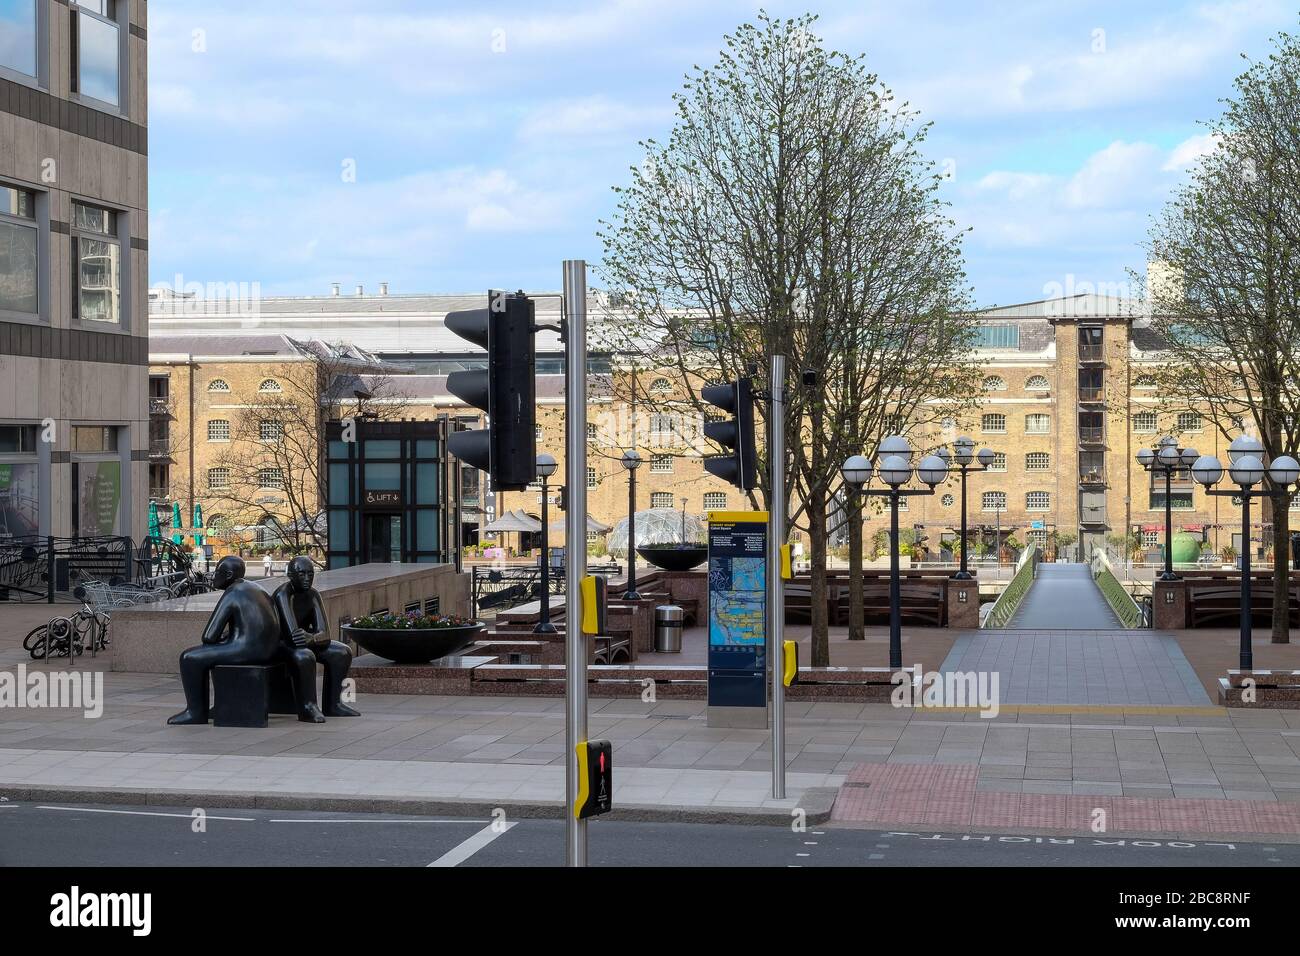 London UK 03 April 2020, Abandoned City in lockdown social distancing at Canary Wharf on a sunny Friday afternoon Credit: Michelle Sadgrove/Alamy Live News Stock Photo